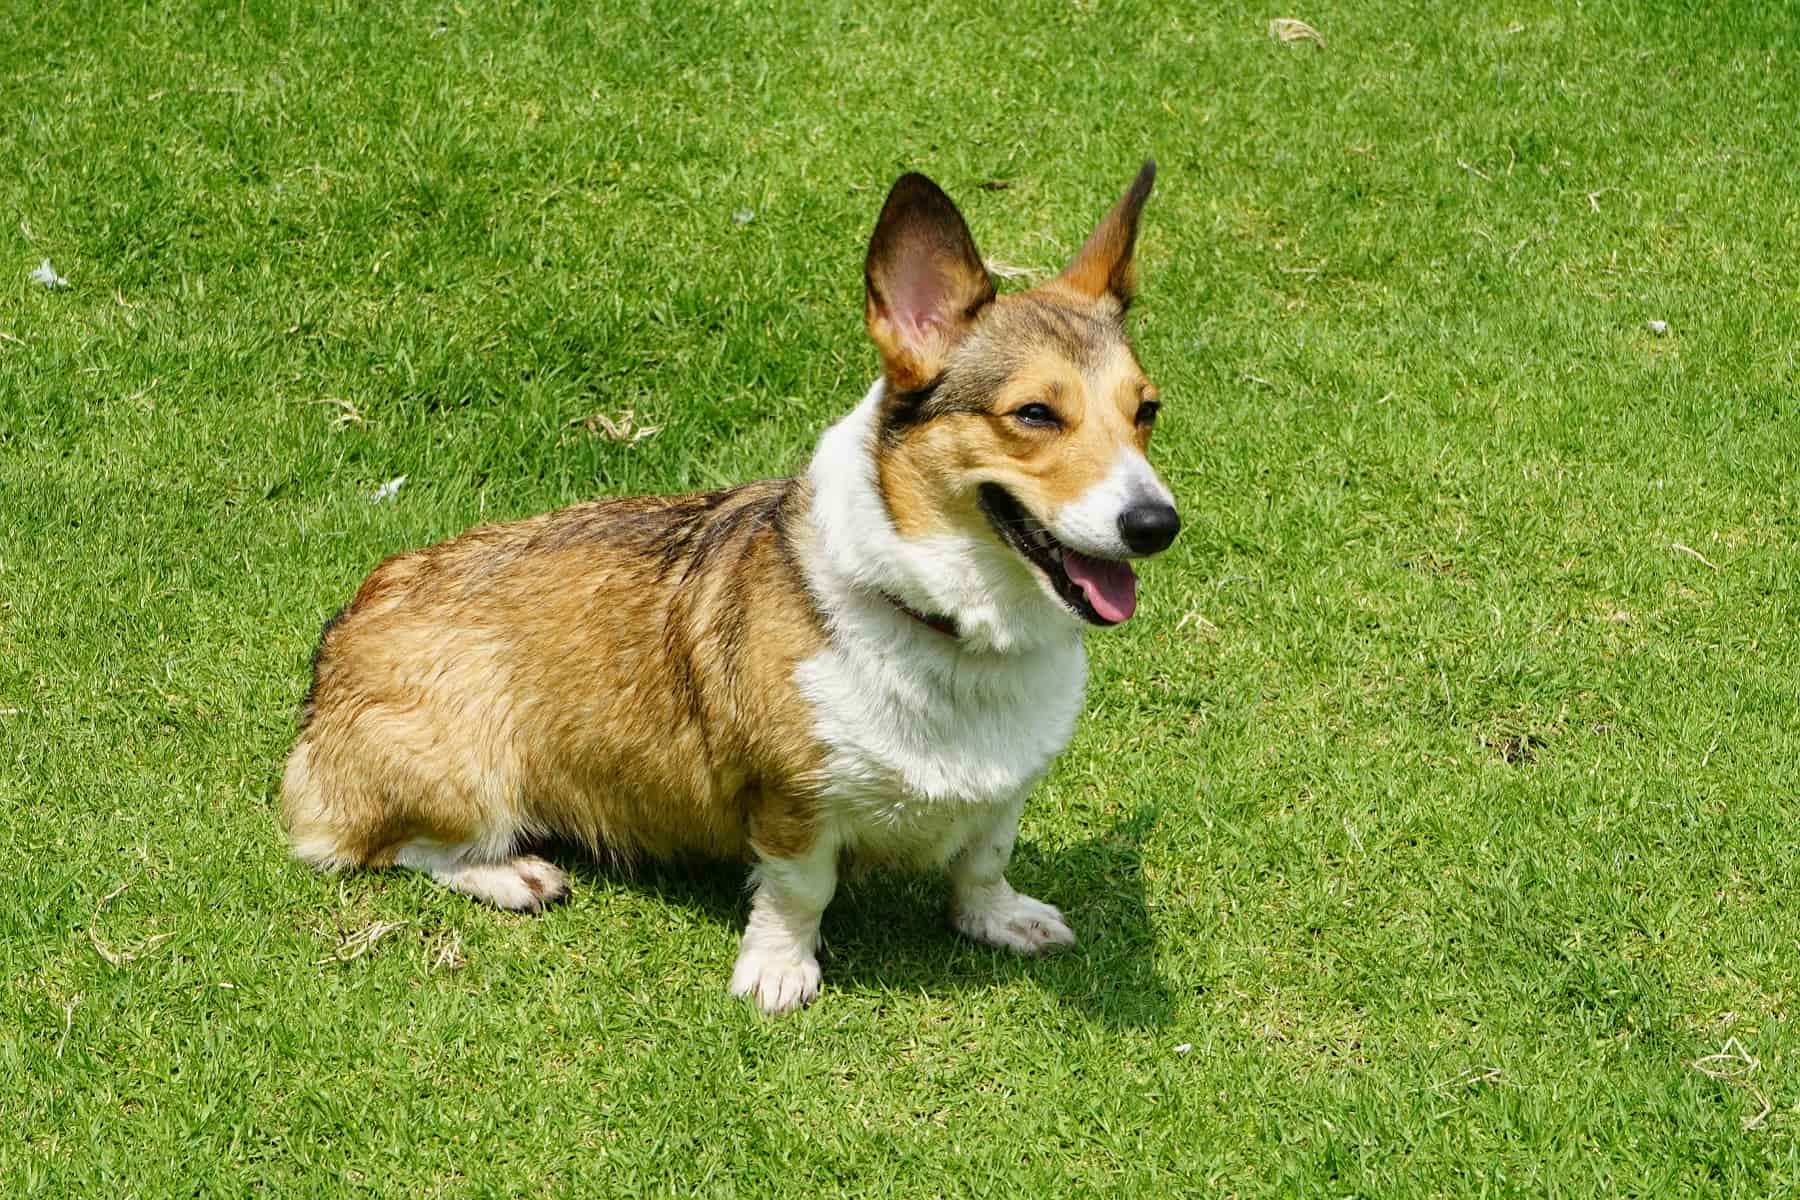 Are corgis playful dogs. This corgi is in the grass outside ready to play.